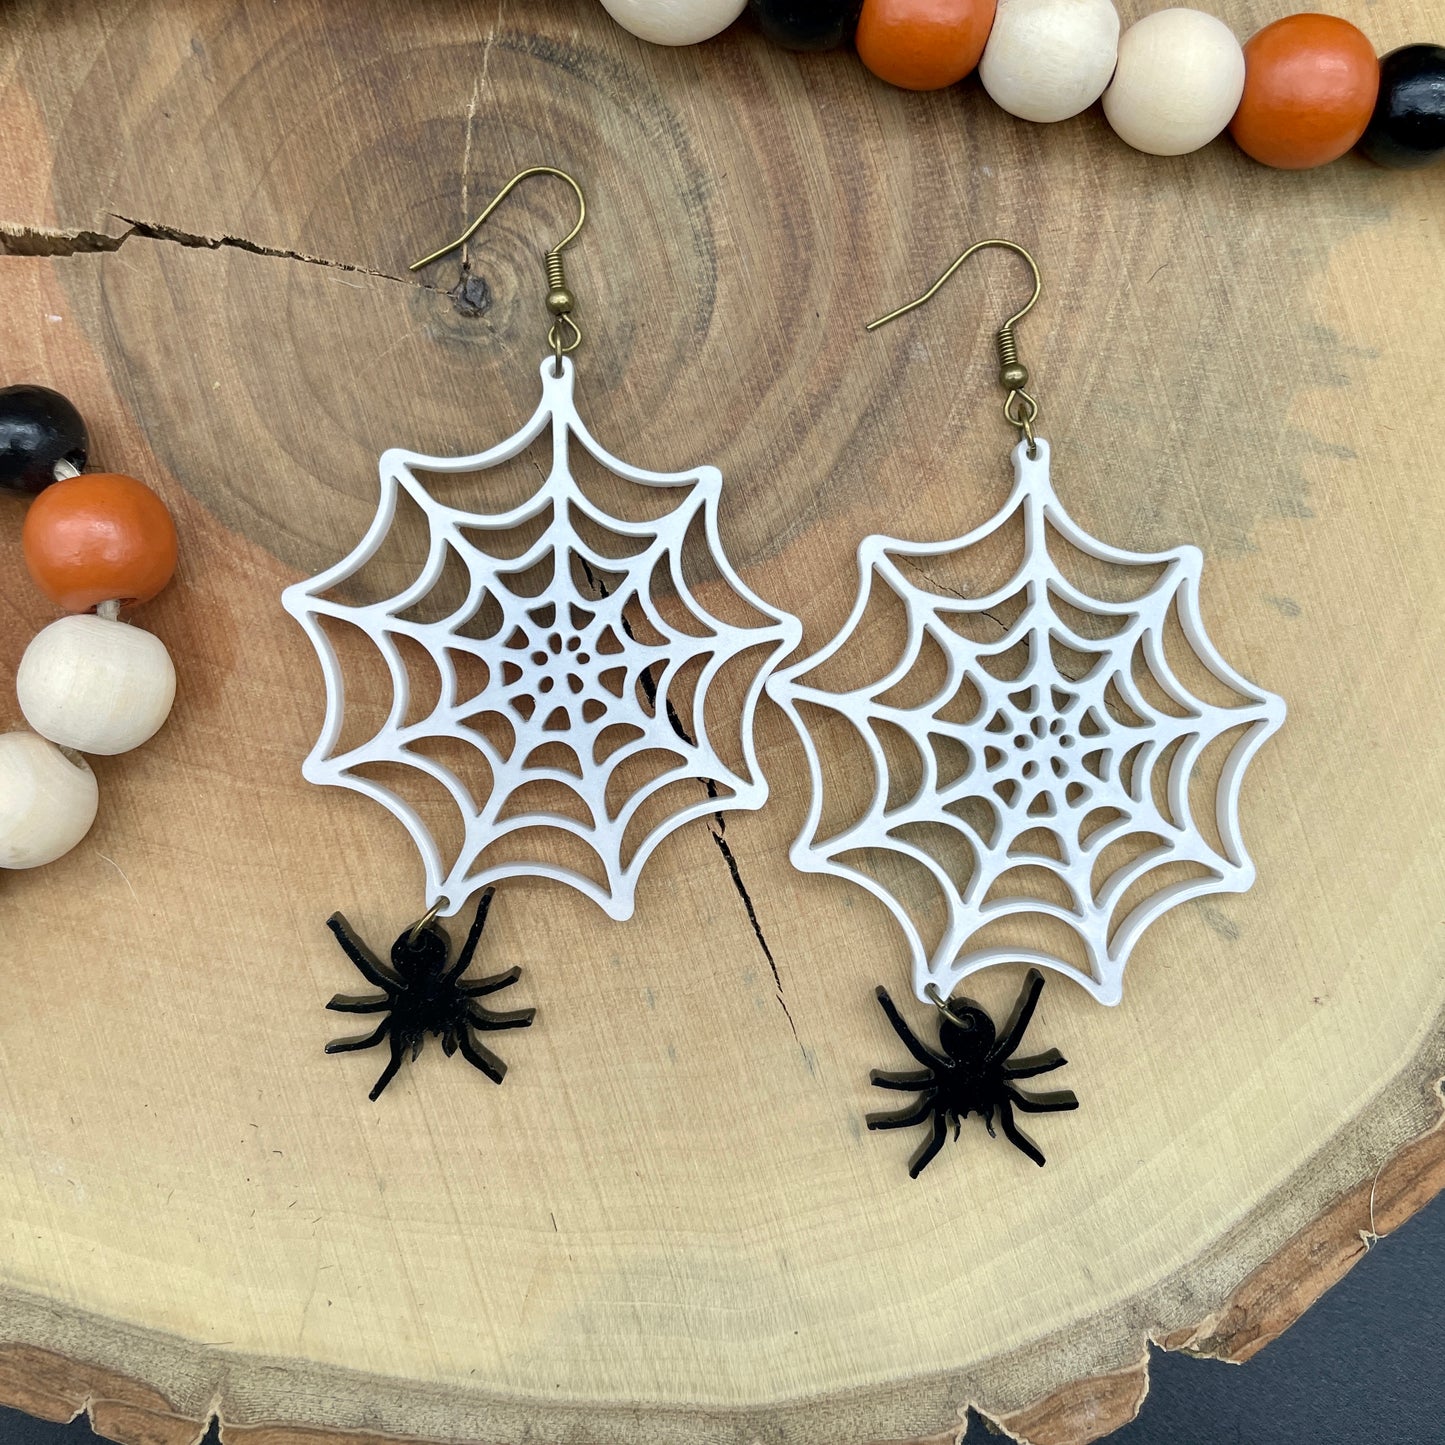 Spider web and spider Halloween earrings